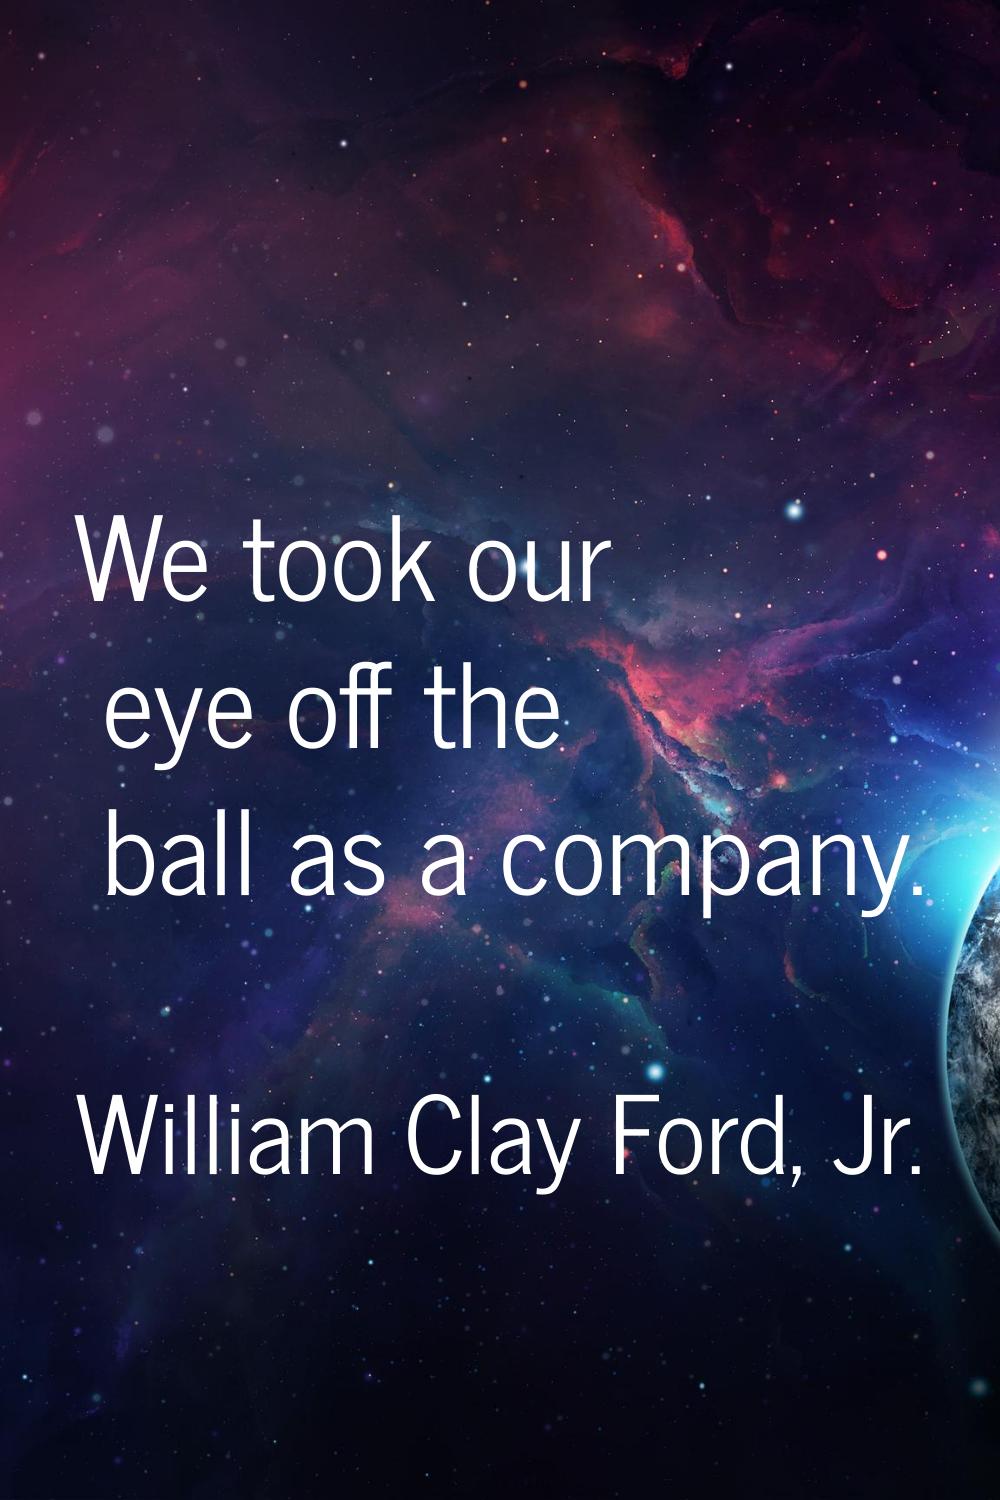 We took our eye off the ball as a company.